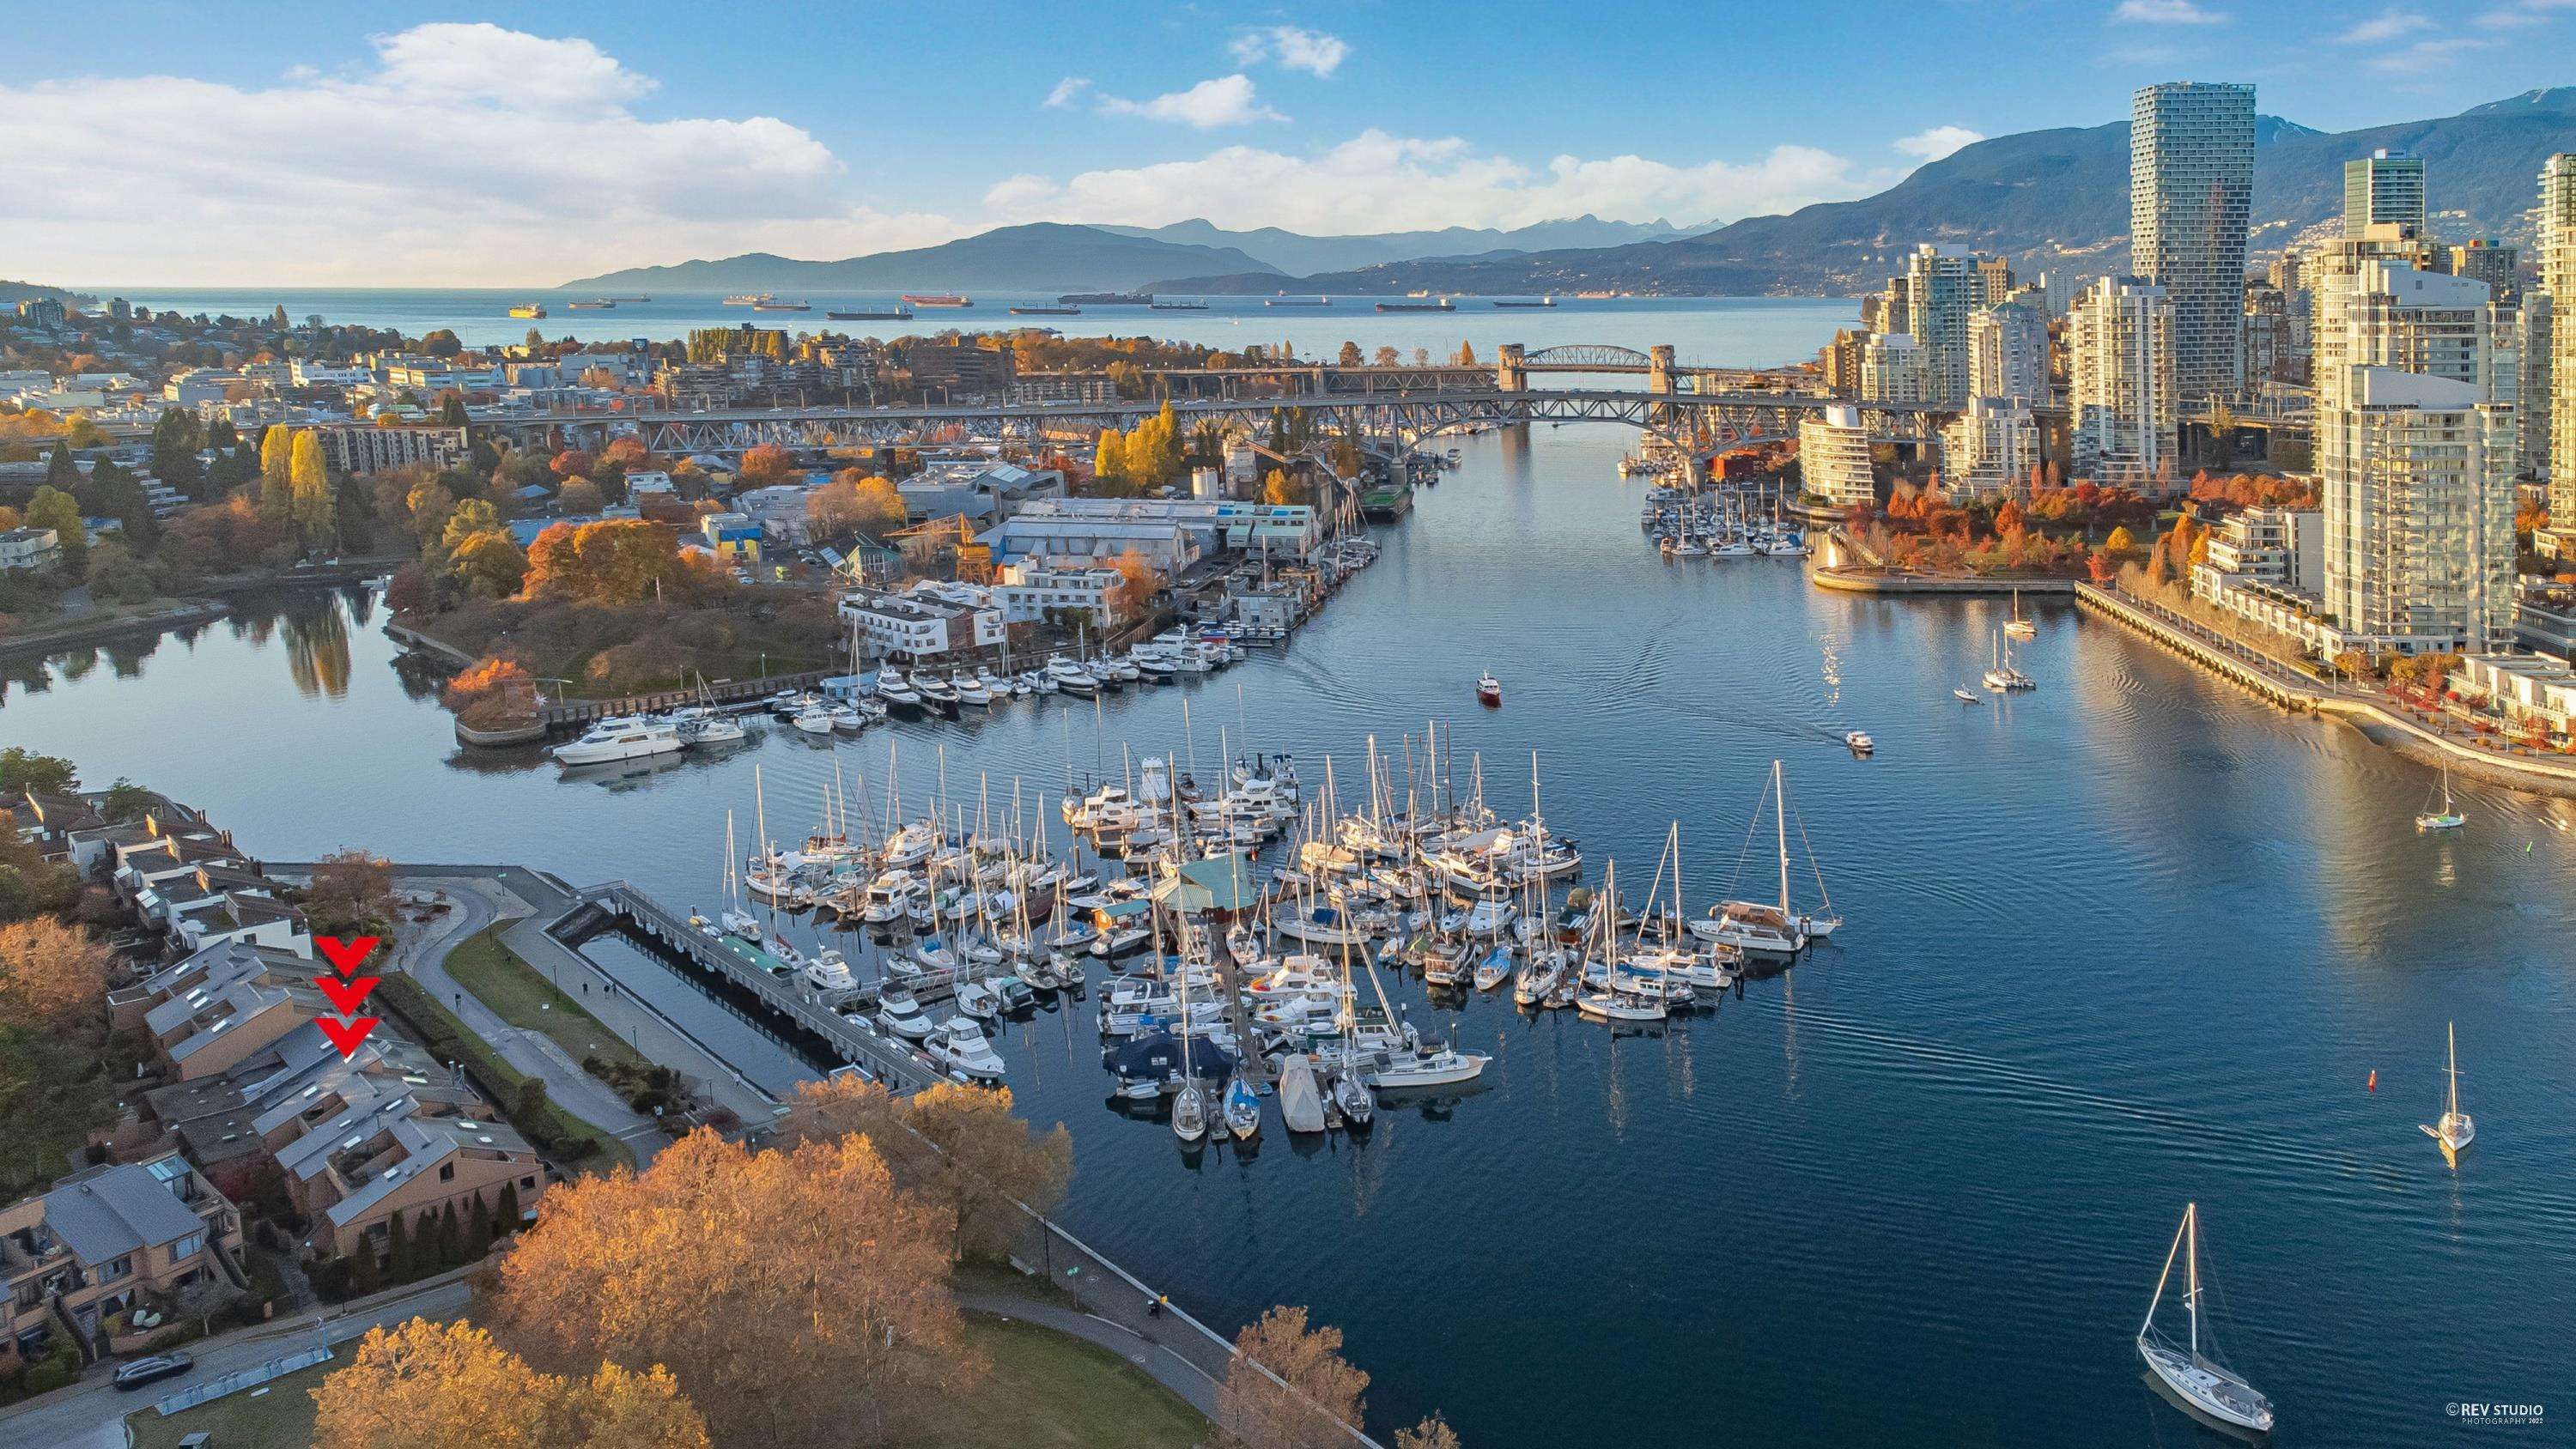 Open House. Open House on Saturday, November 19, 2022 2:00PM - 4:00PM
WATERFRONT TOWNHOUSE w/ stunning water, marina, cityscape and mtn views. 180 degree views W out to English Bay sunsets and E to the Cambie St. Bridge sunrises. Renovation by Colbrone Ar